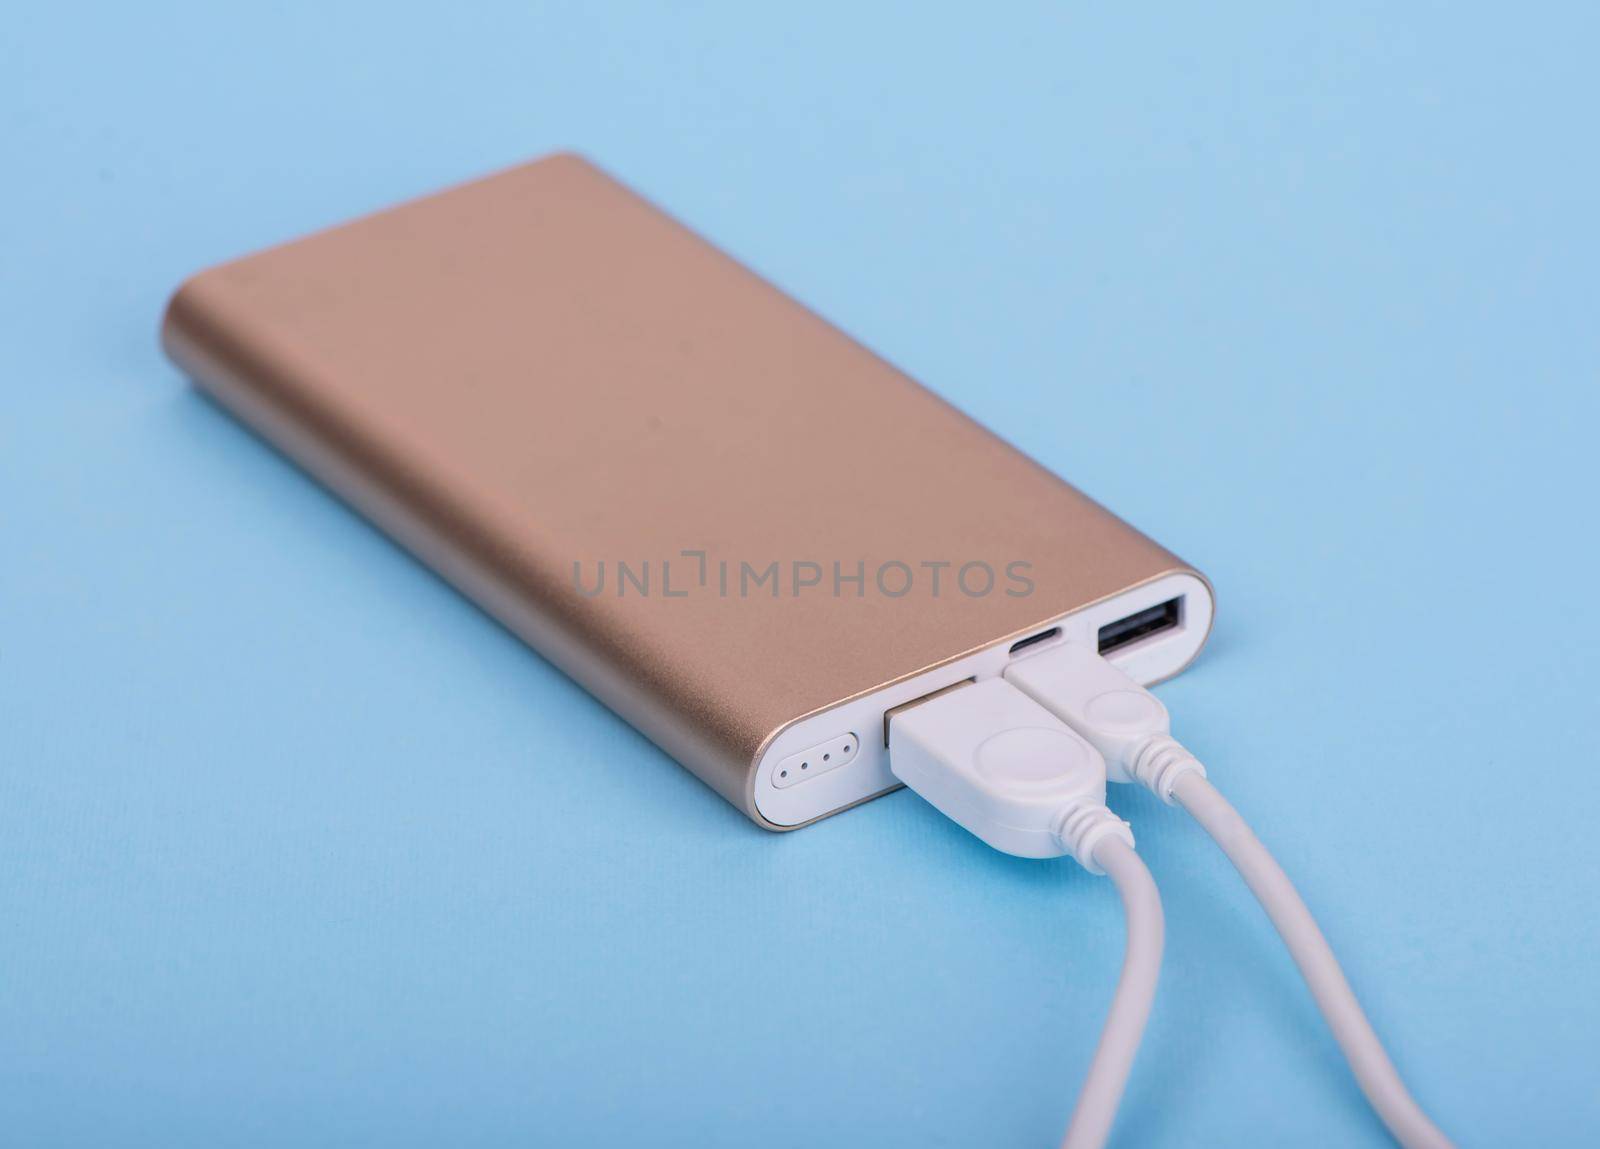 Smartphone charging with power bank on a blue background by aprilphoto